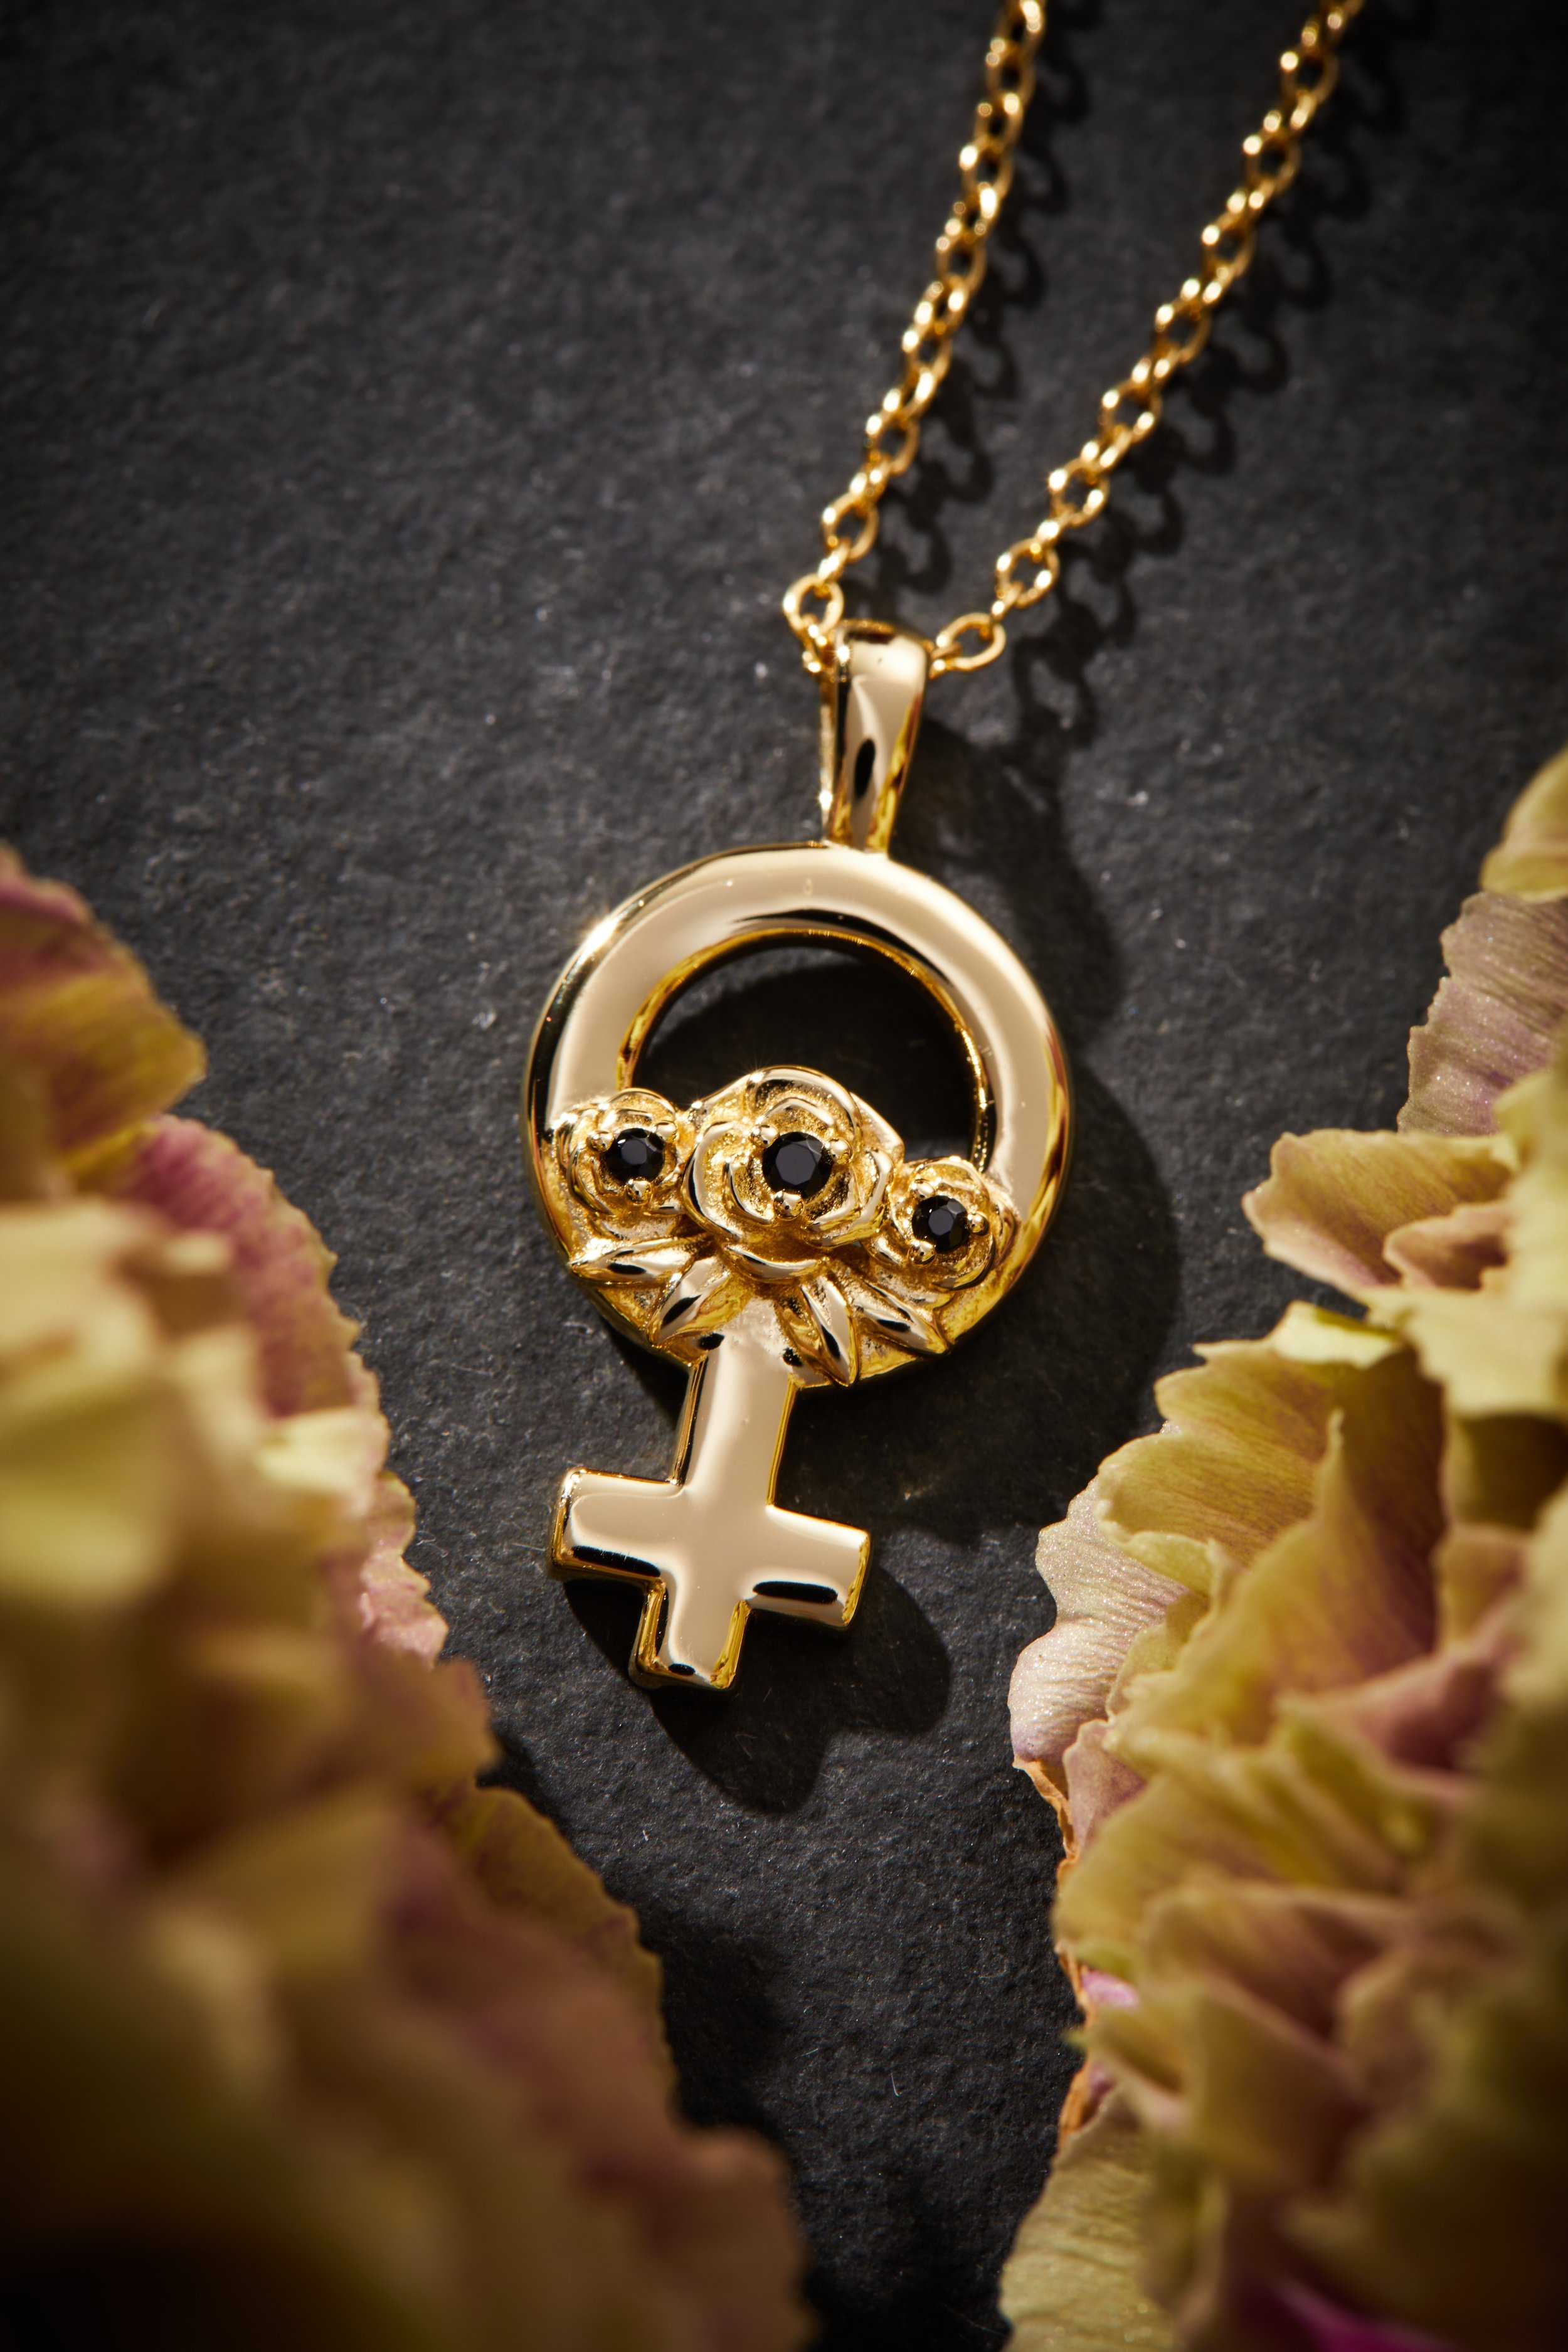 Gold Woman Power Pendant Necklace - Gift at the Gardner